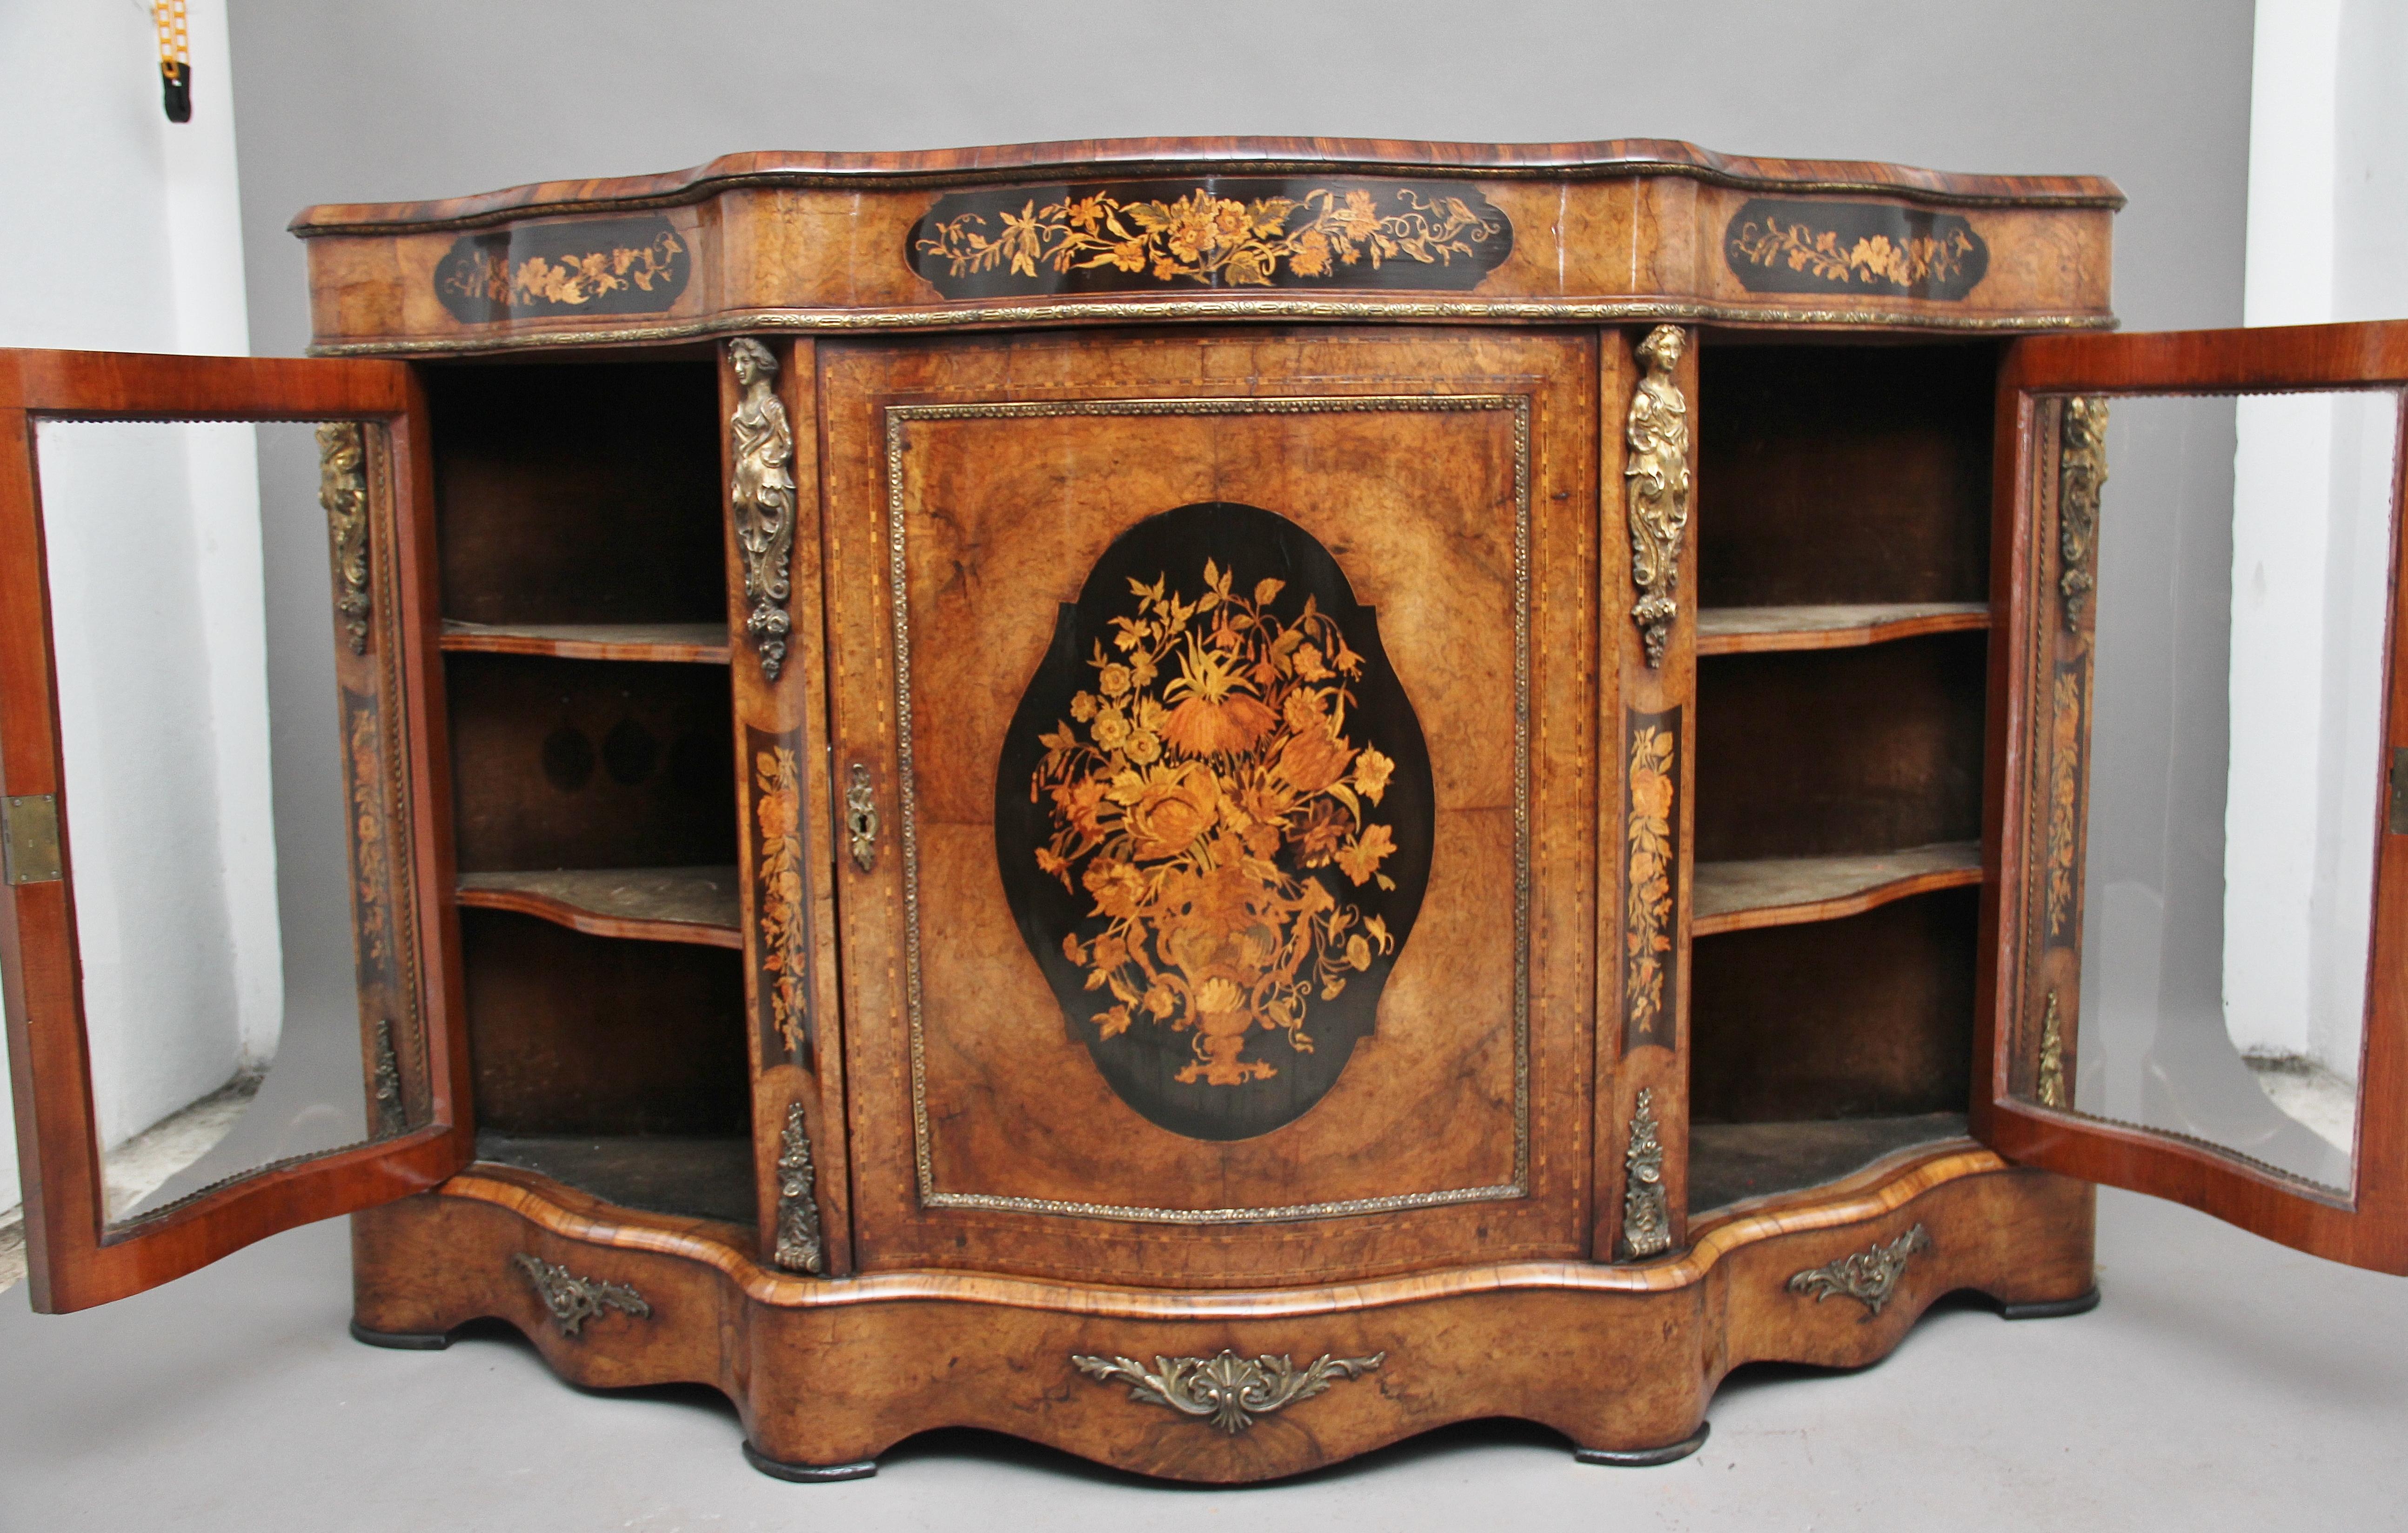 A superb quality 19th century burr walnut and floral marquetry credenza of serpentine form, having a beautifully shaped and figured burr walnut top above a frieze with ormolu moulding, decorated with floral inlaid marquetry panels, the central